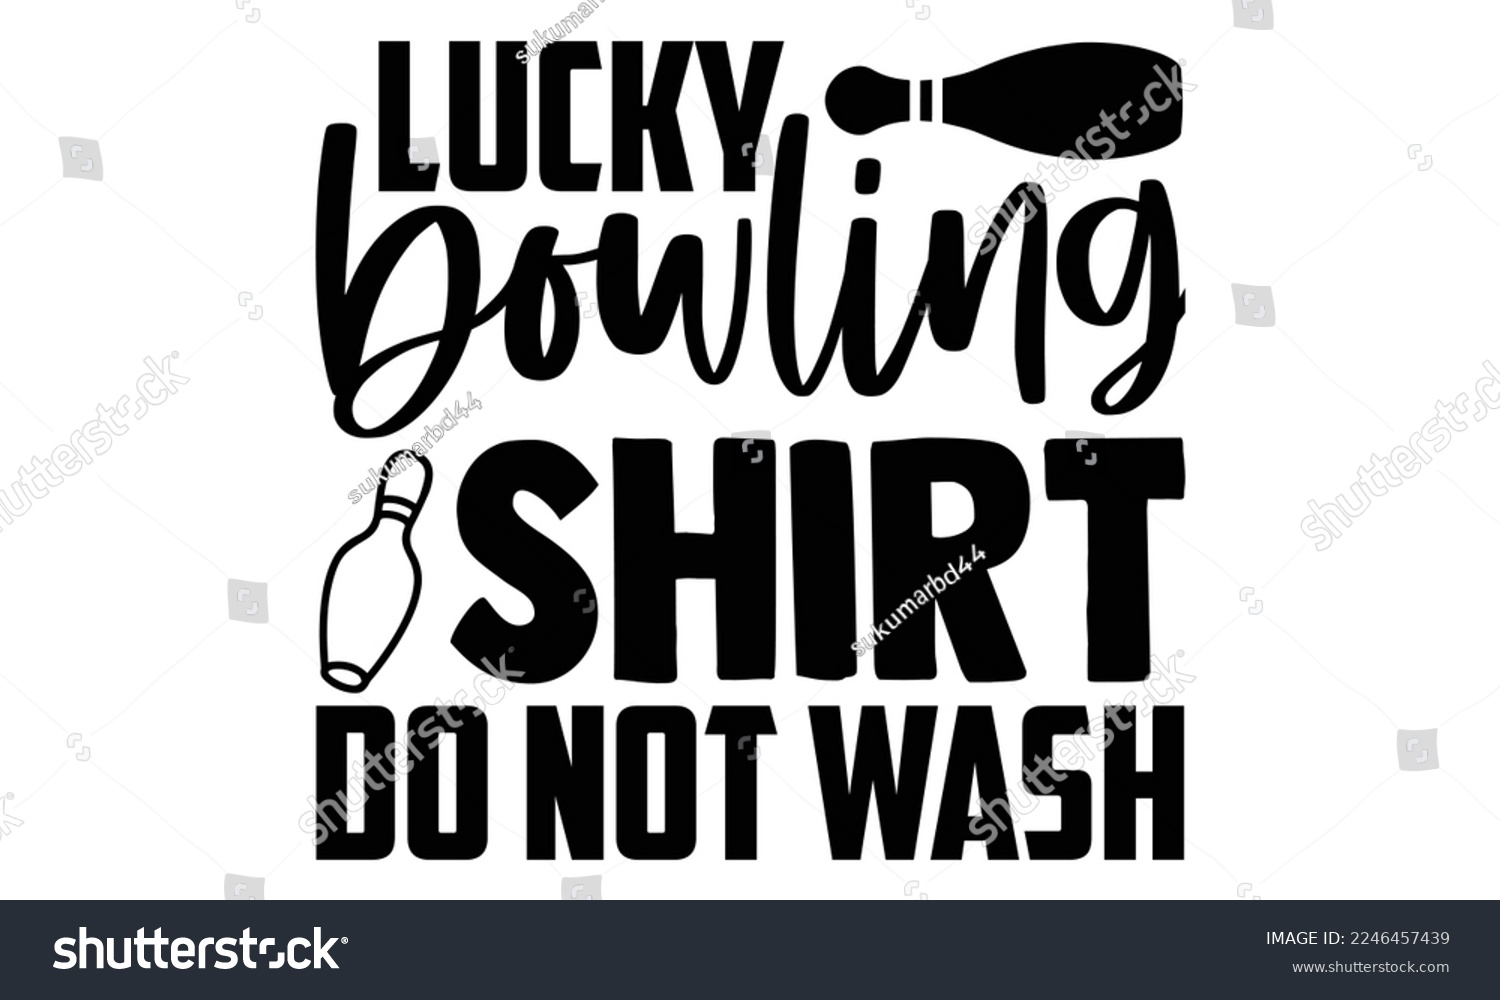 SVG of Lucky Bowling Shirt Do Not Wash - Bowling T-shirt Design, Illustration for prints on bags, posters, cards, mugs, svg for Cutting Machine, Silhouette Cameo, Hand drawn lettering phrase. svg